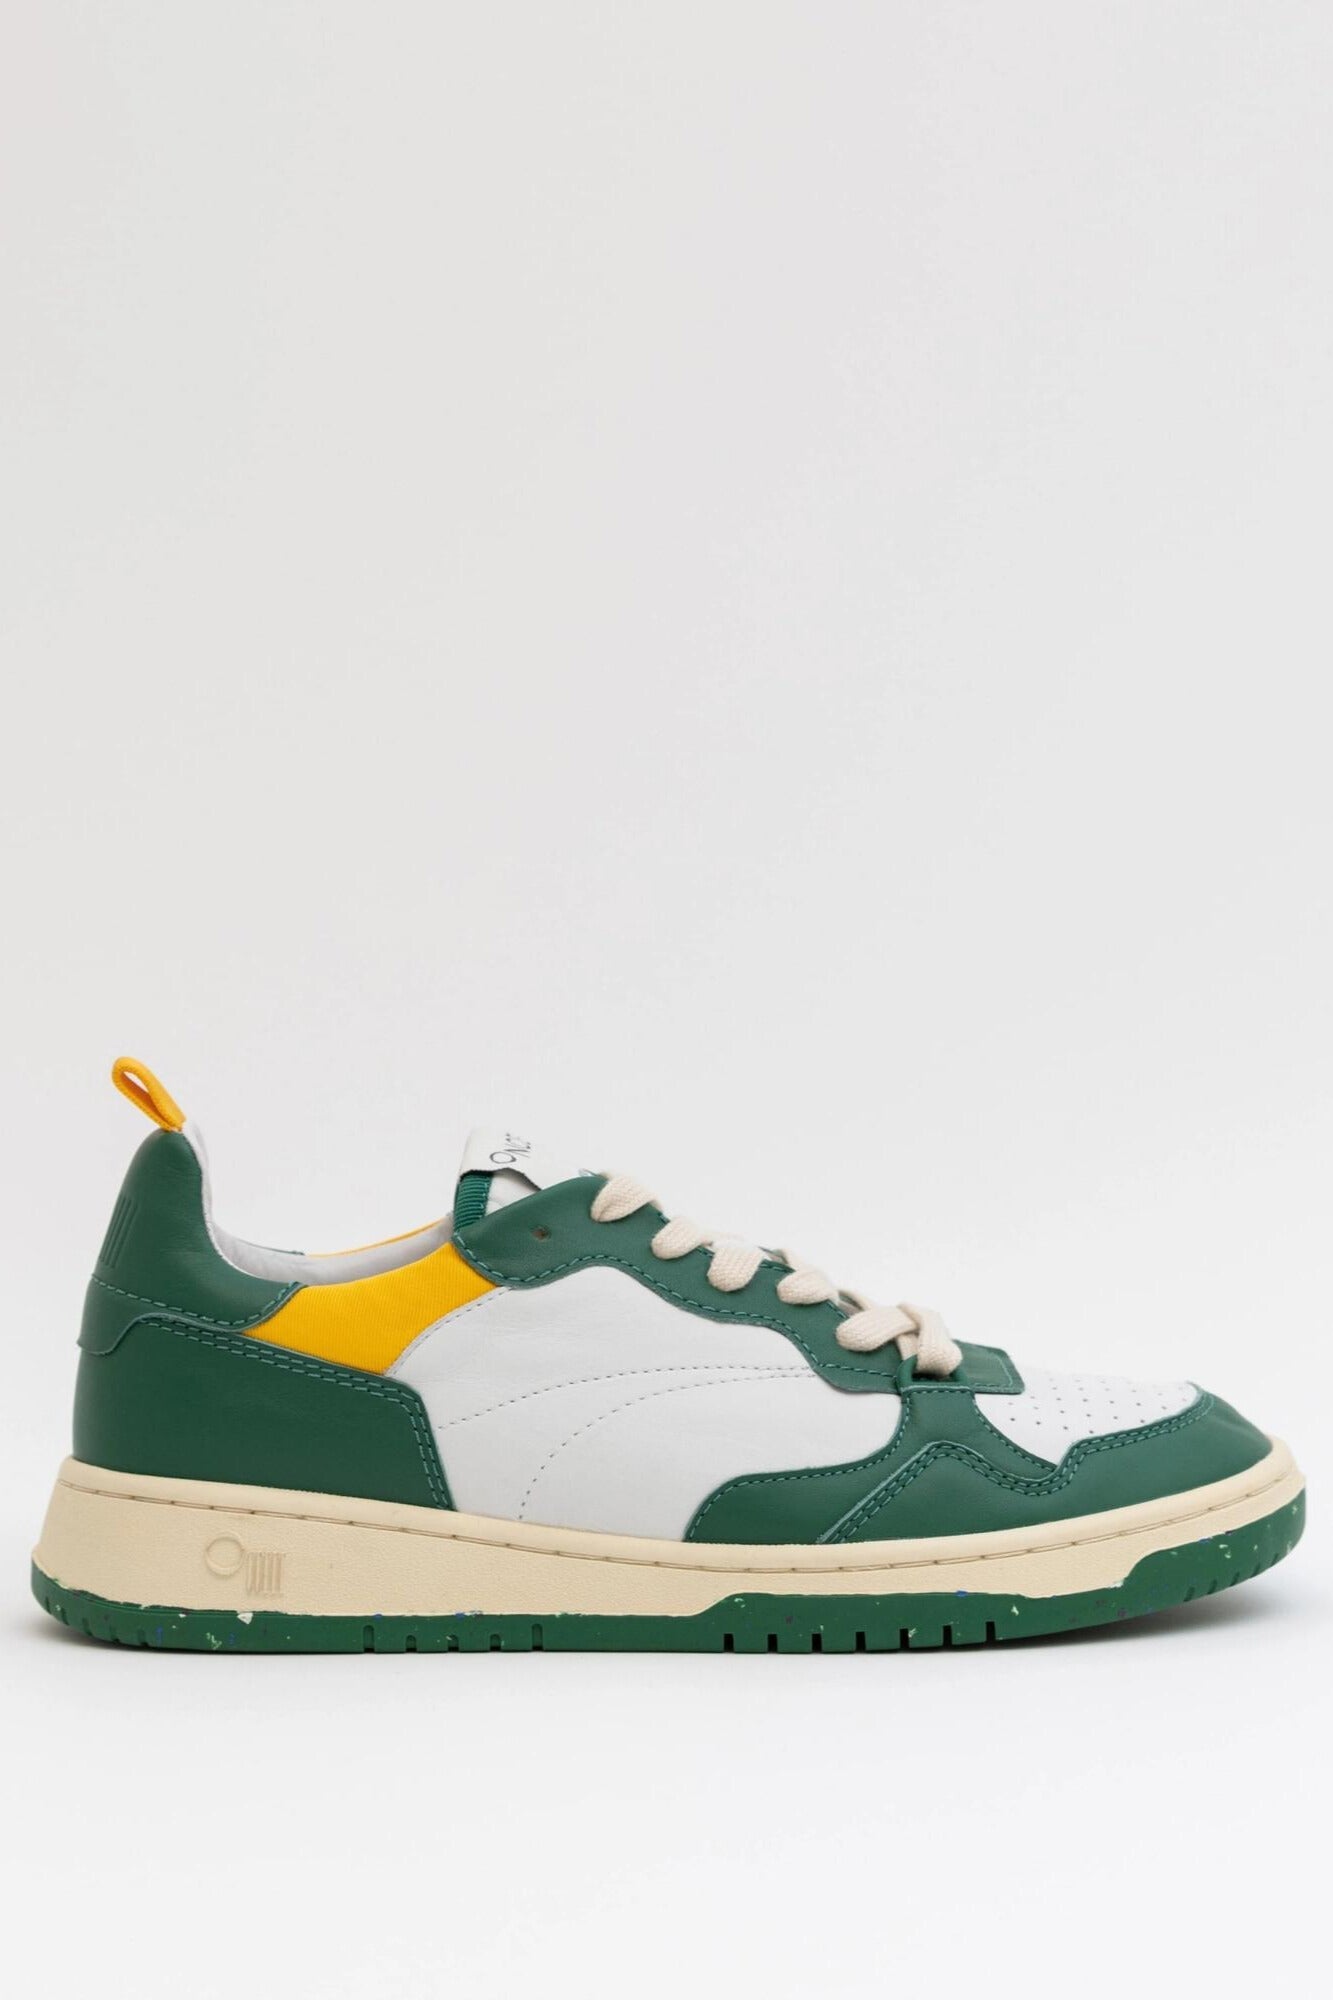 Green Fields Retro Courtside Sneaker - Oncept - Color Game